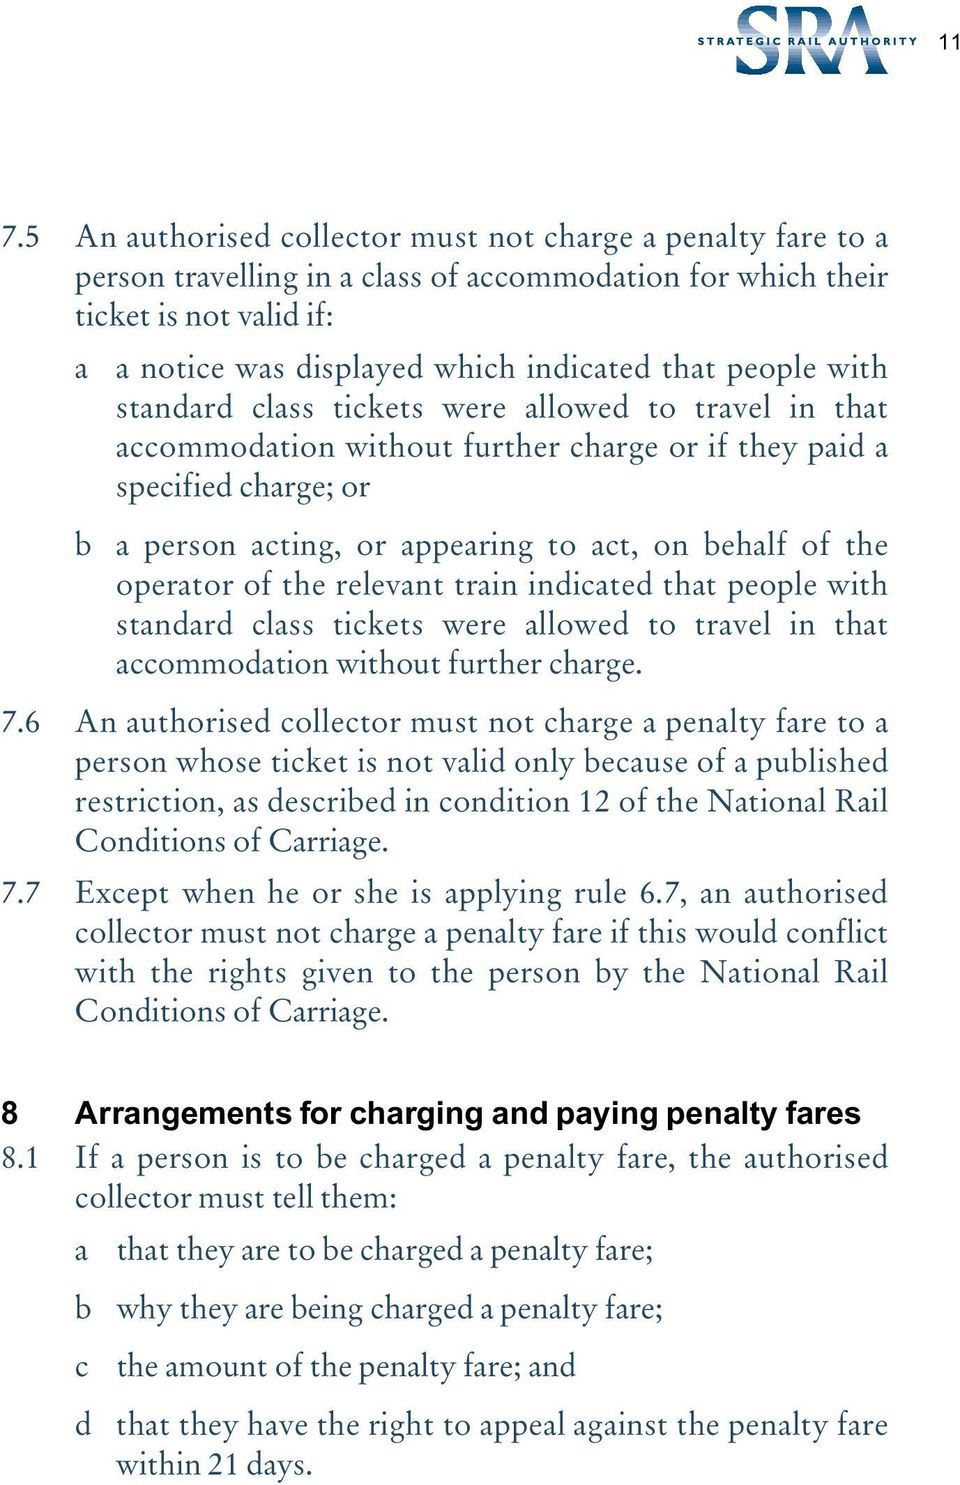 operator of the relevant train indicated that people with standard class tickets were allowed to travel in that accommodation without further charge. 7.